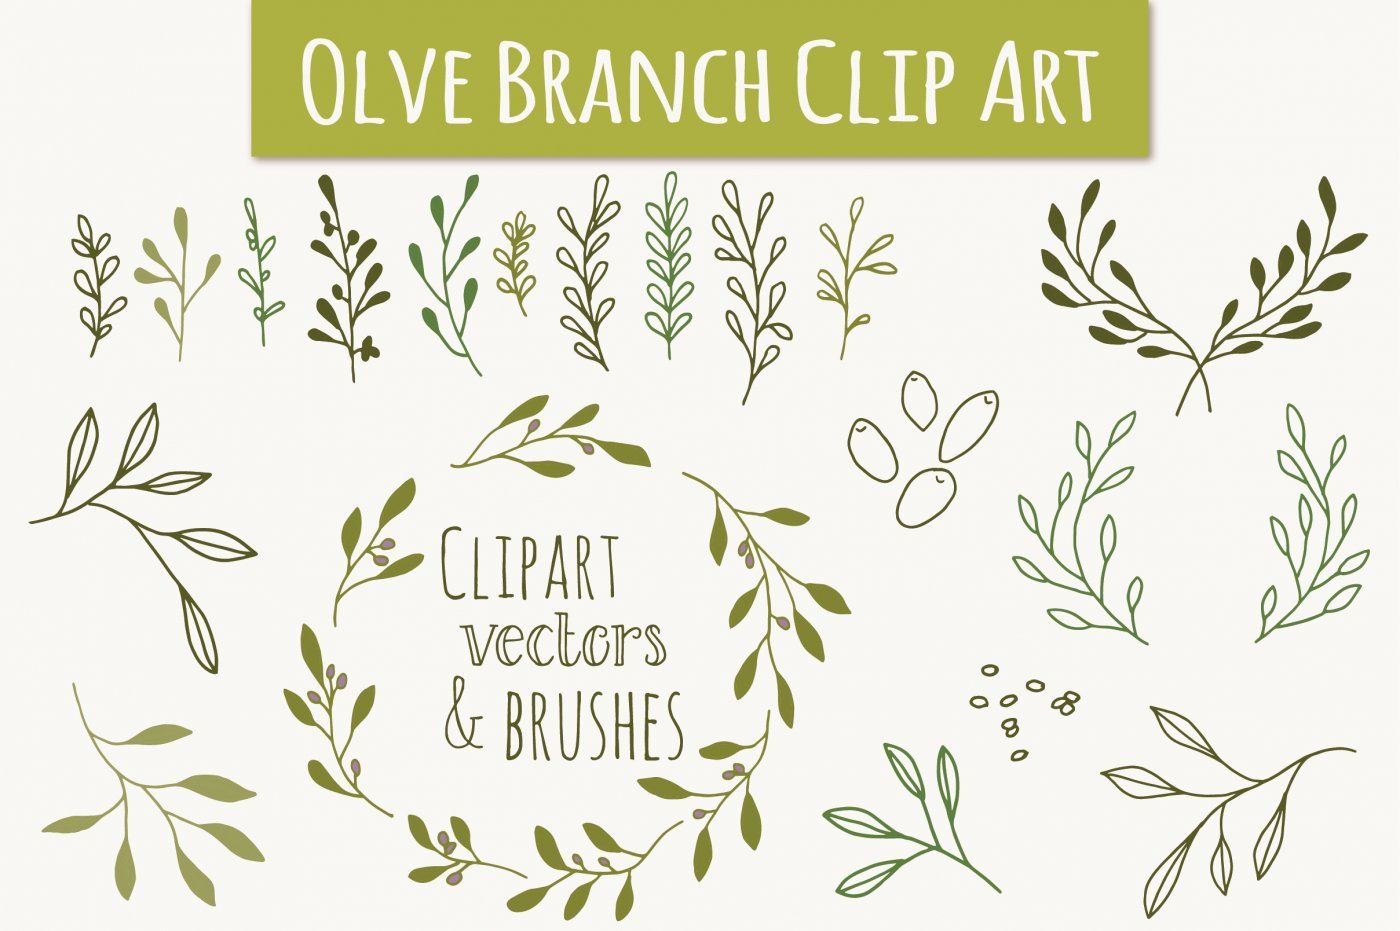 Olive Branch Clip Art Vectors By The Pen And Brush Thehungryjpeg Com